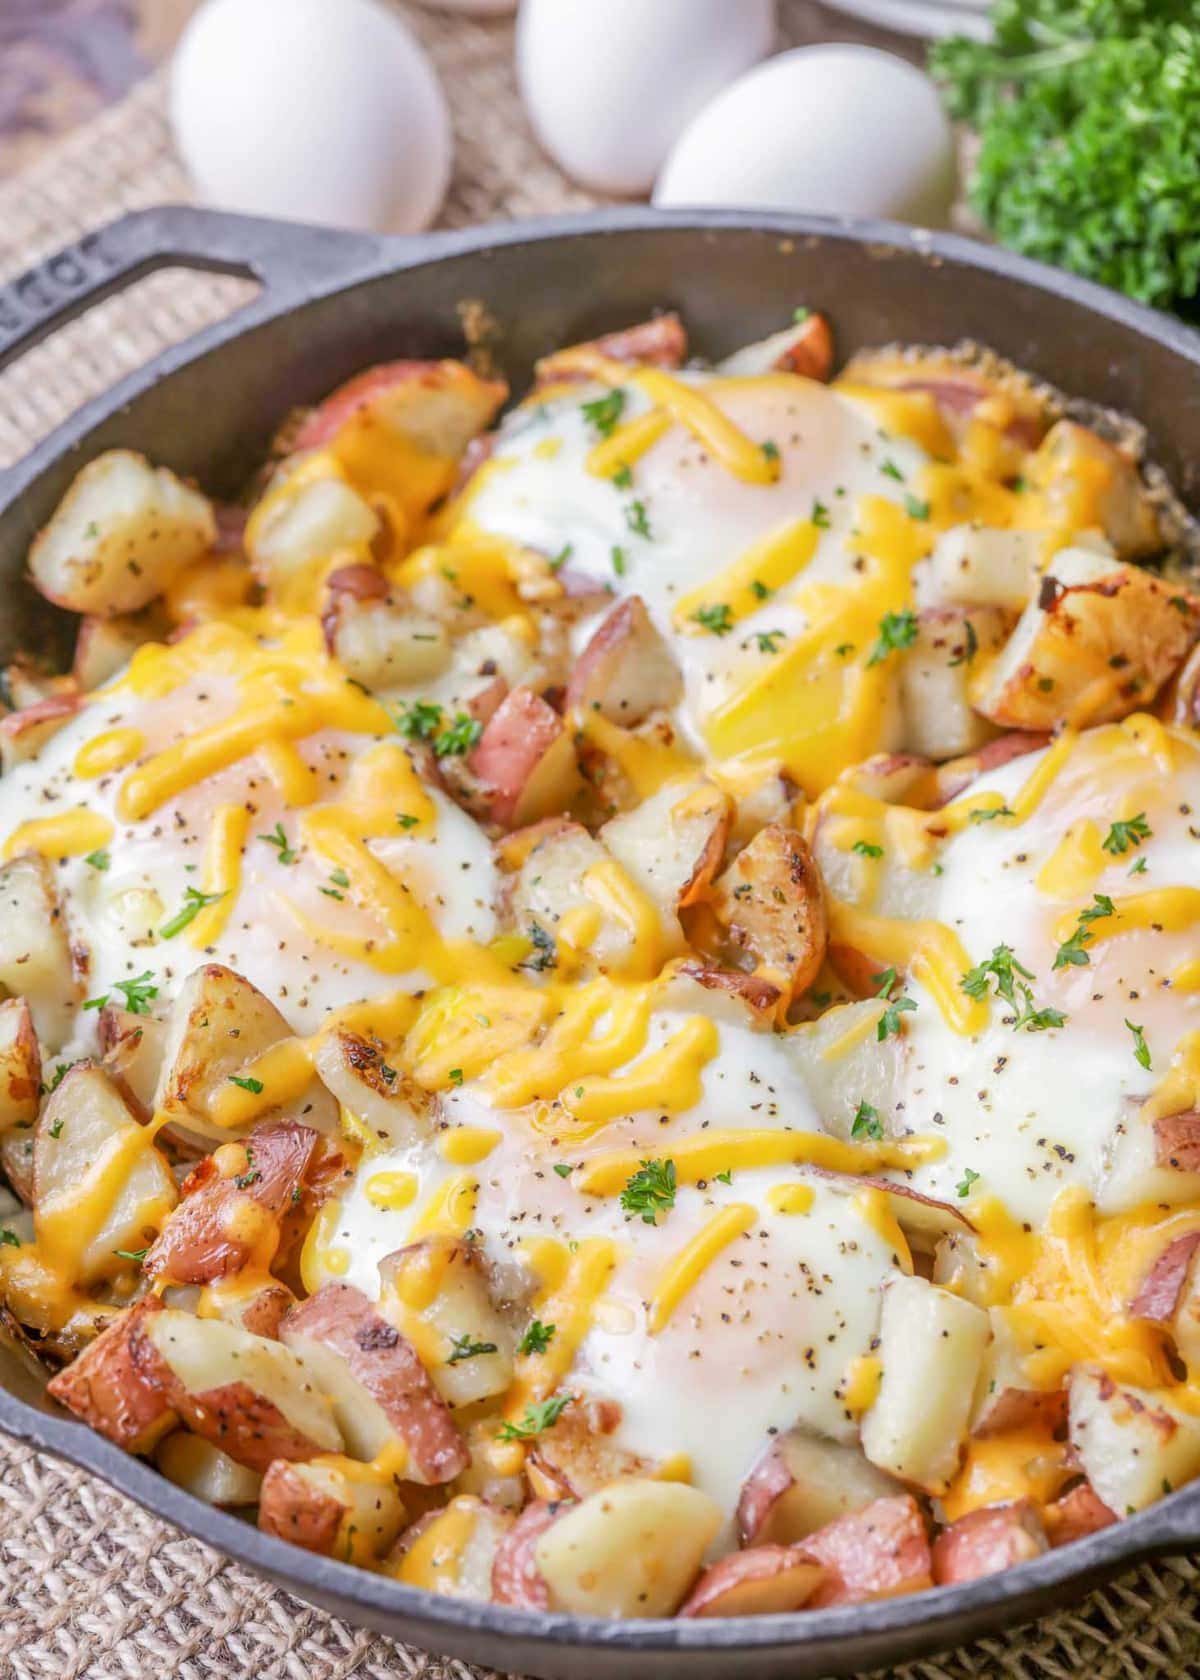 Eggs and Potatoes Recipe in Skillet